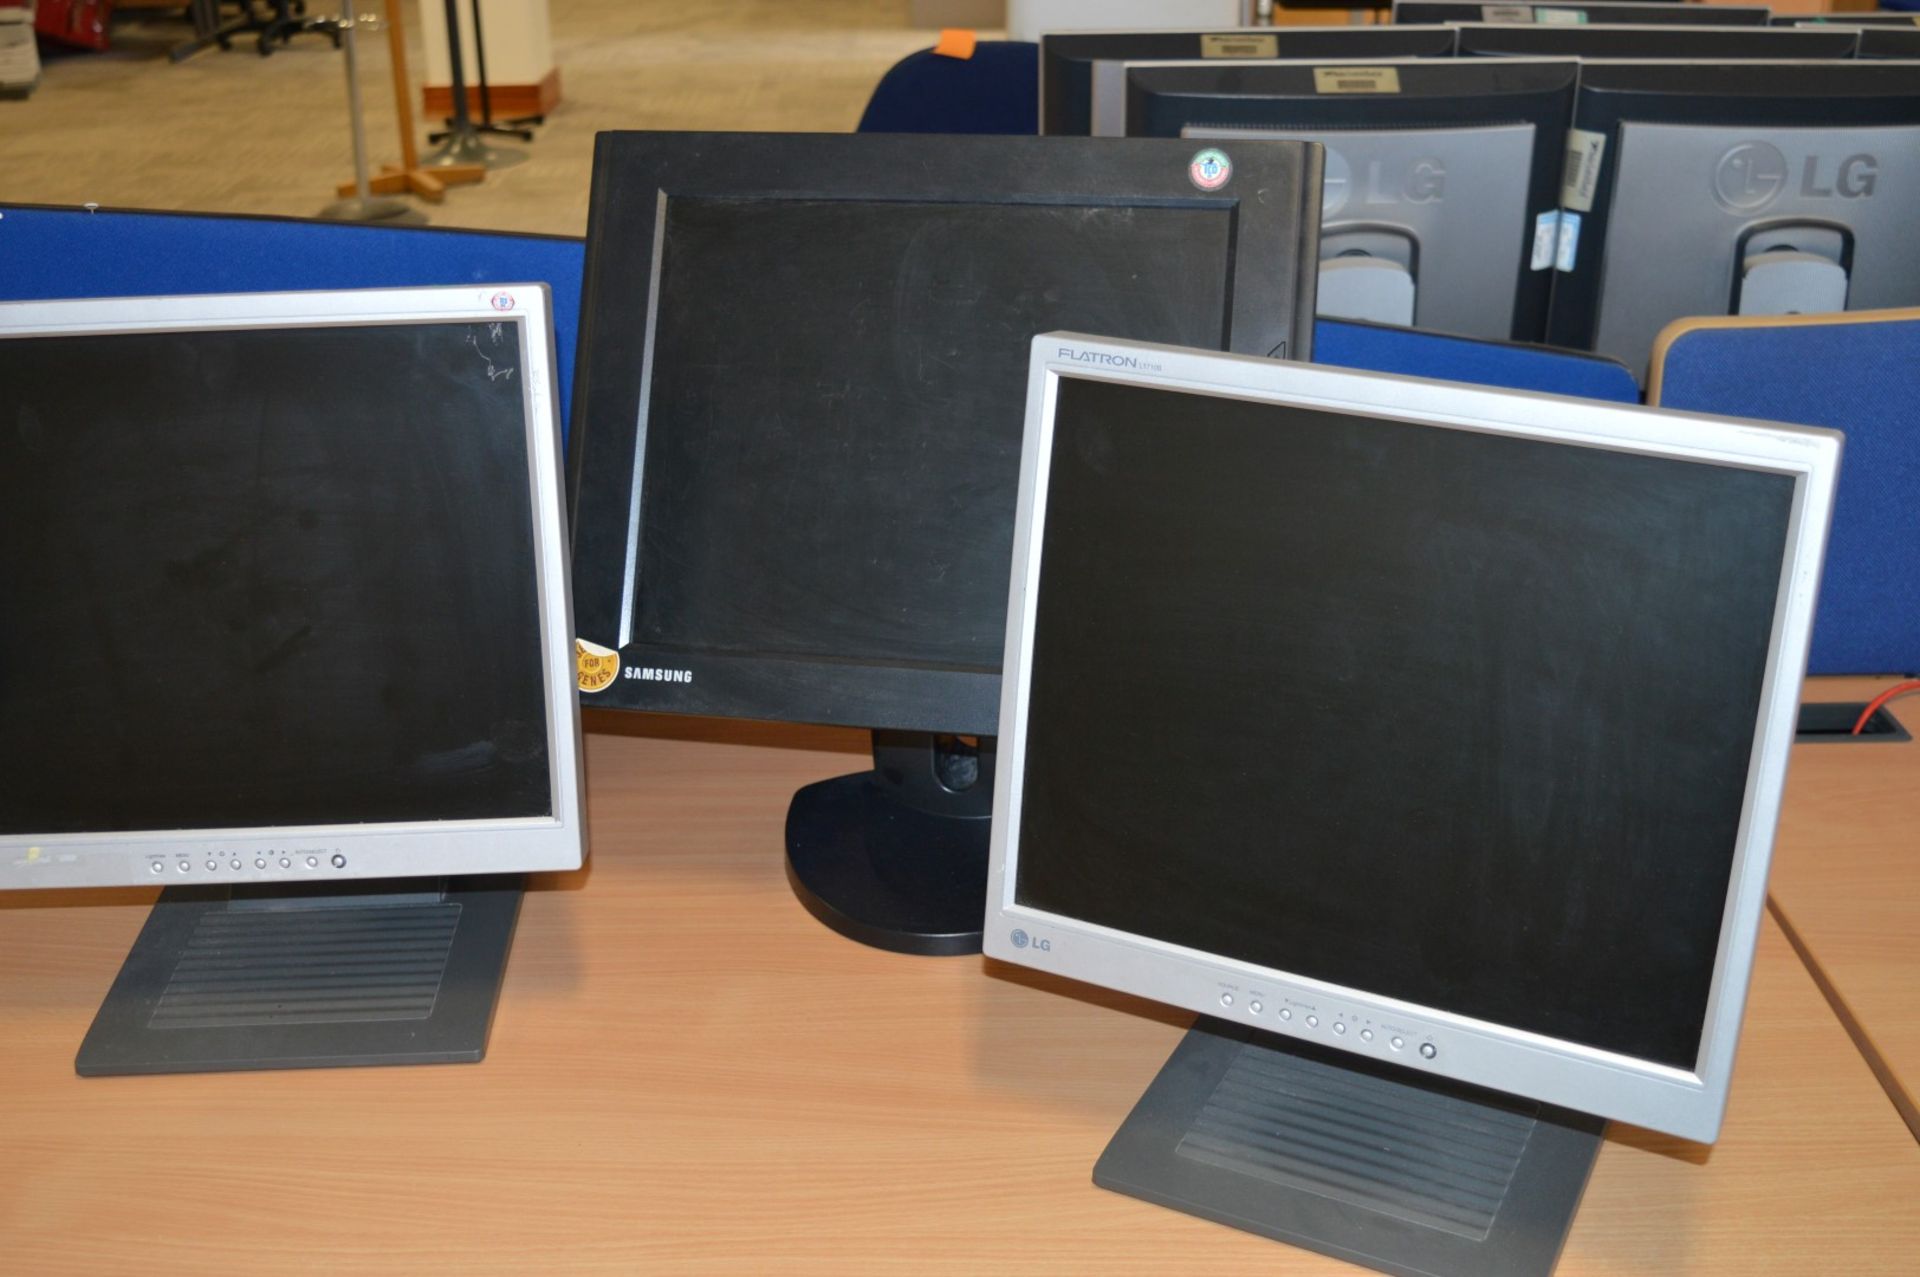 4 x Flat Screen TFT Computer Monitors - LG and Samsung Branded - Models Include L1710B, L1710s, - Image 3 of 7